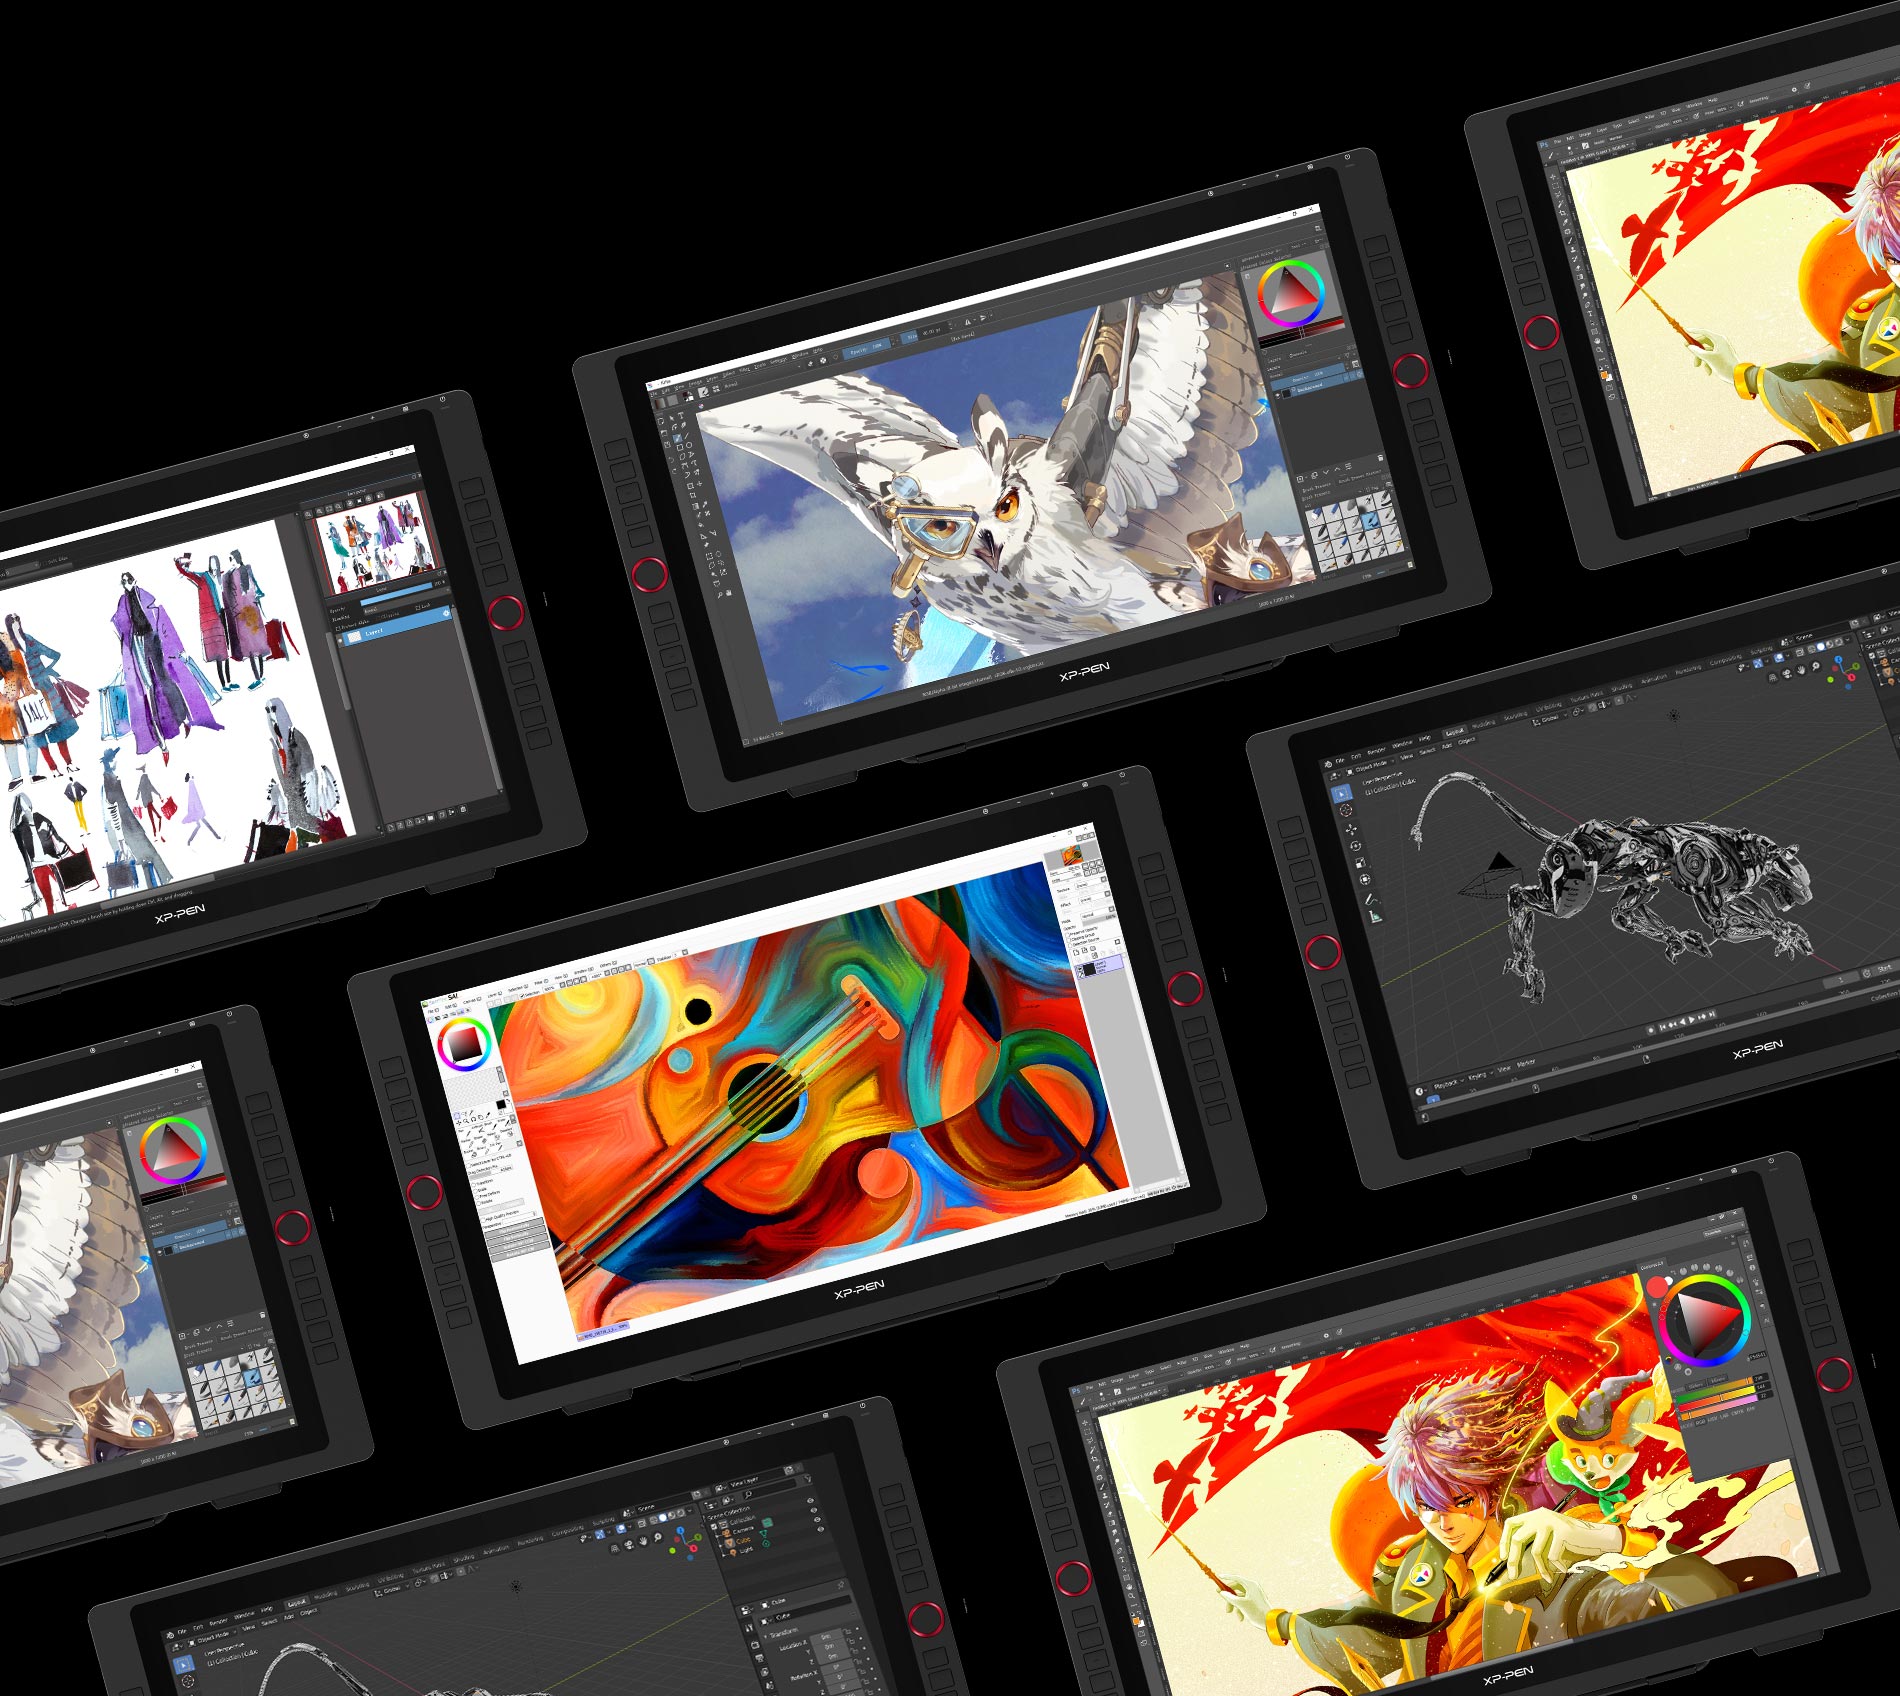 XP-Pen Artist 22R Pro Supports Windows and Mac OS , Compatible with popular digital art software